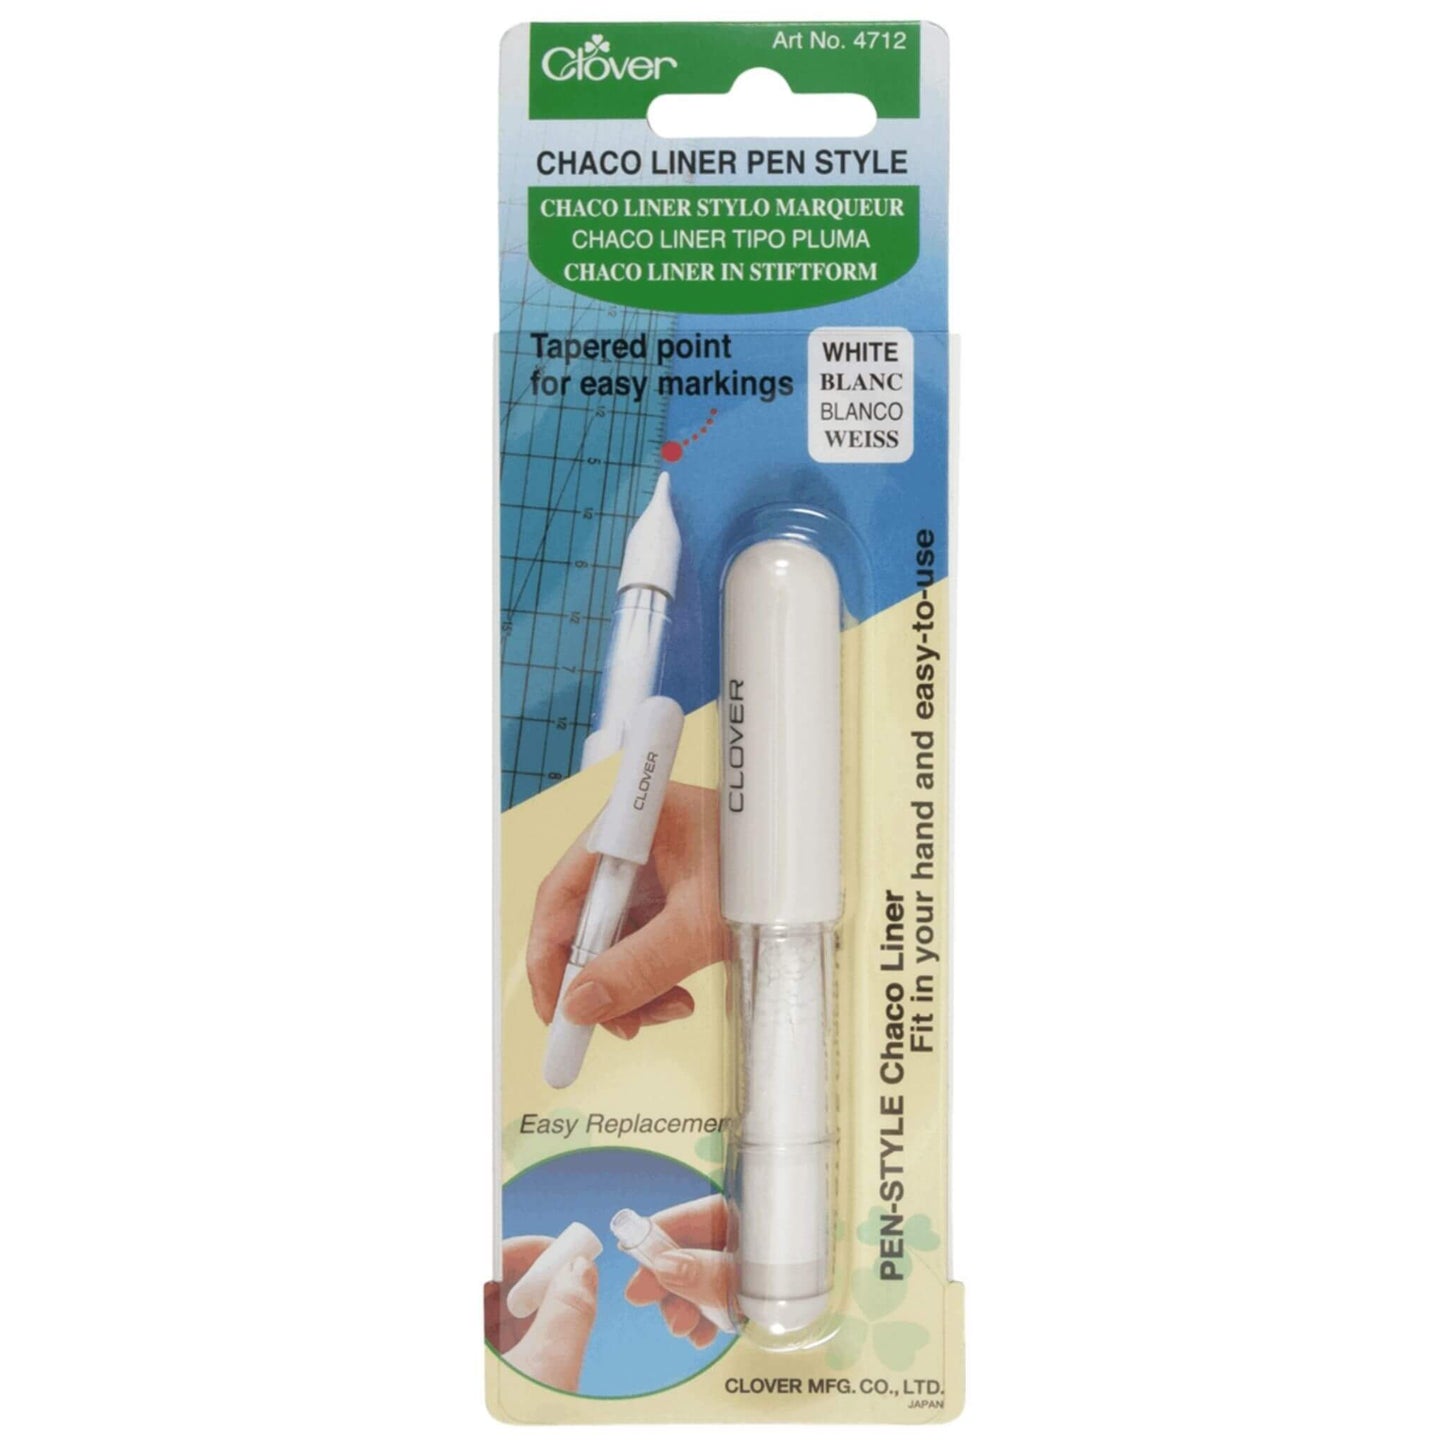 Chaco Liner Style Pen - Clover - White